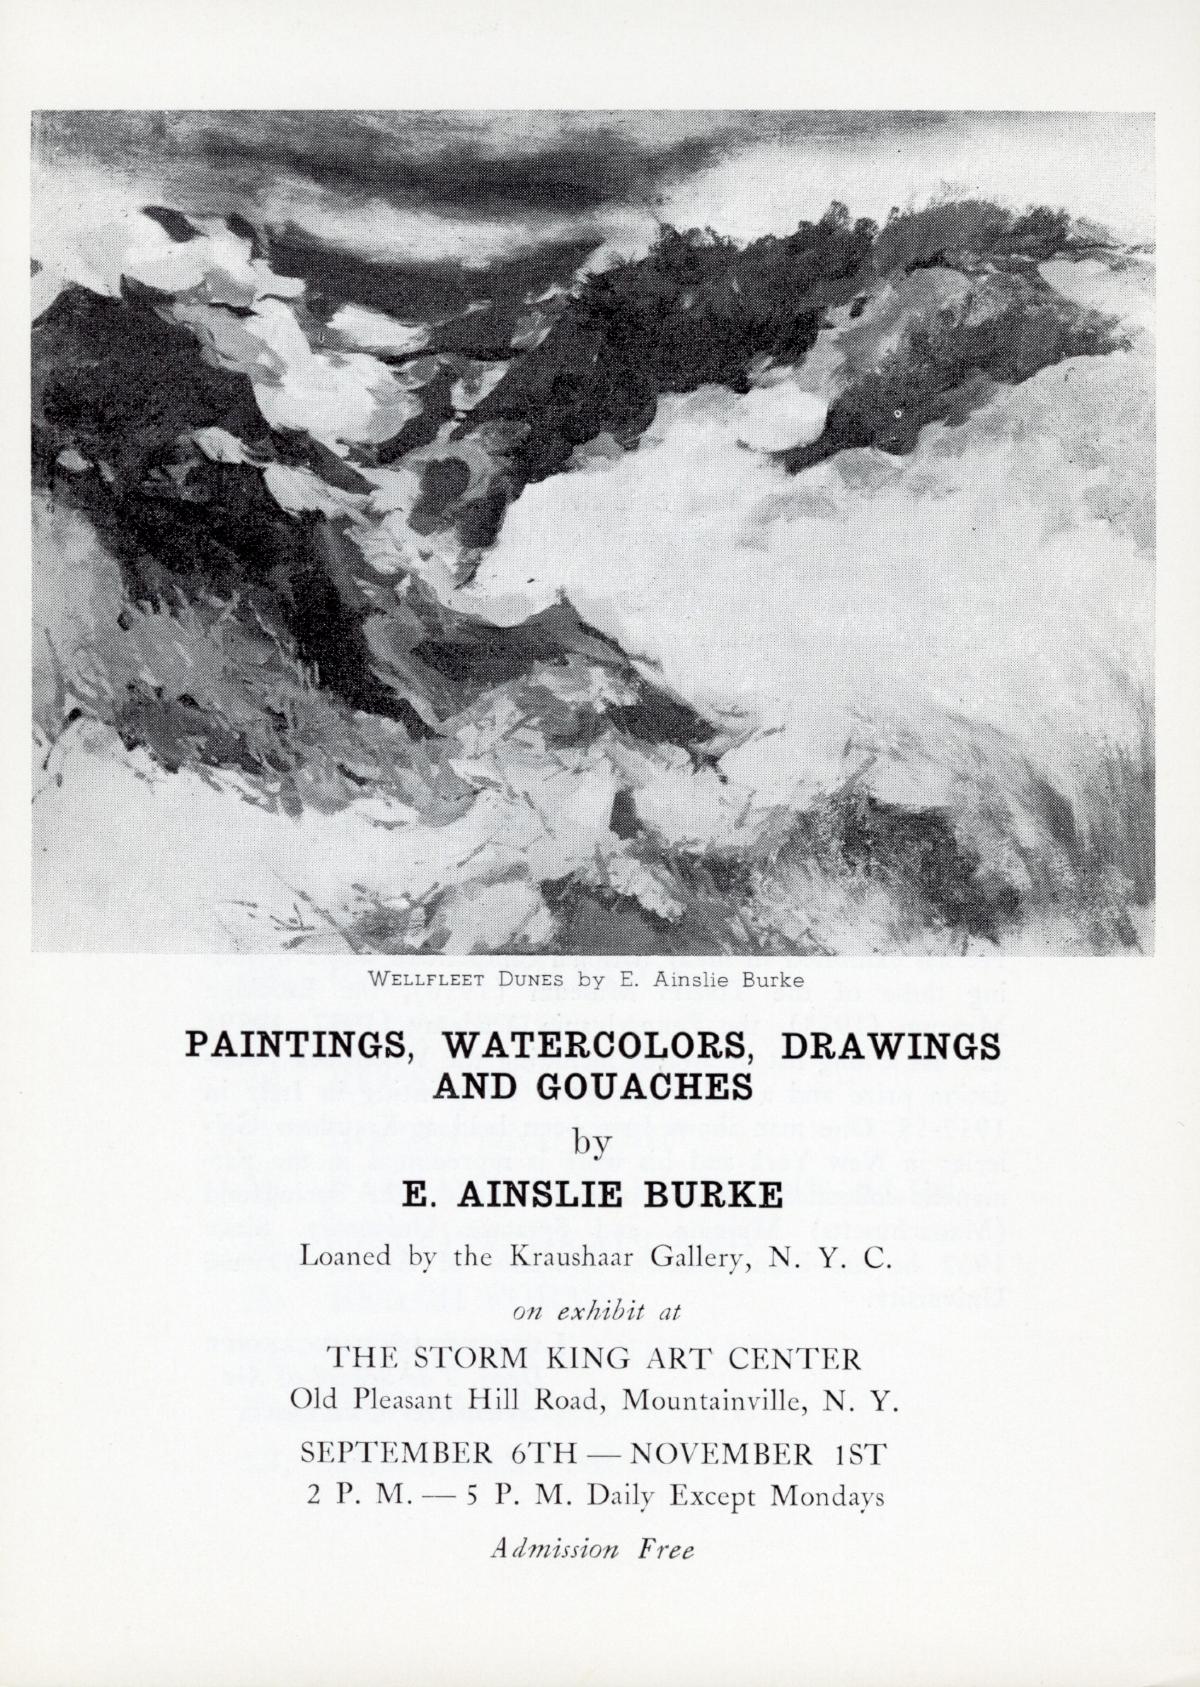 Paintings, Watercolors, Drawings and Gouaches by E. Ainslie Burke, September 6-November 1, 1964, catalogue cover